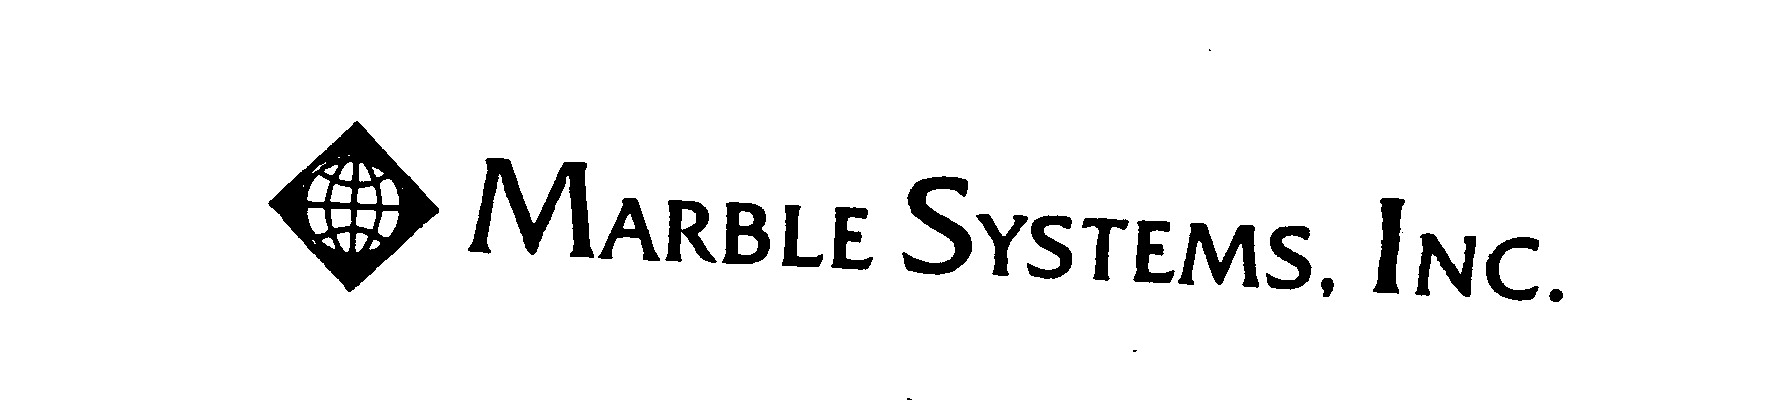  MARBLE SYSTEMS, INC.